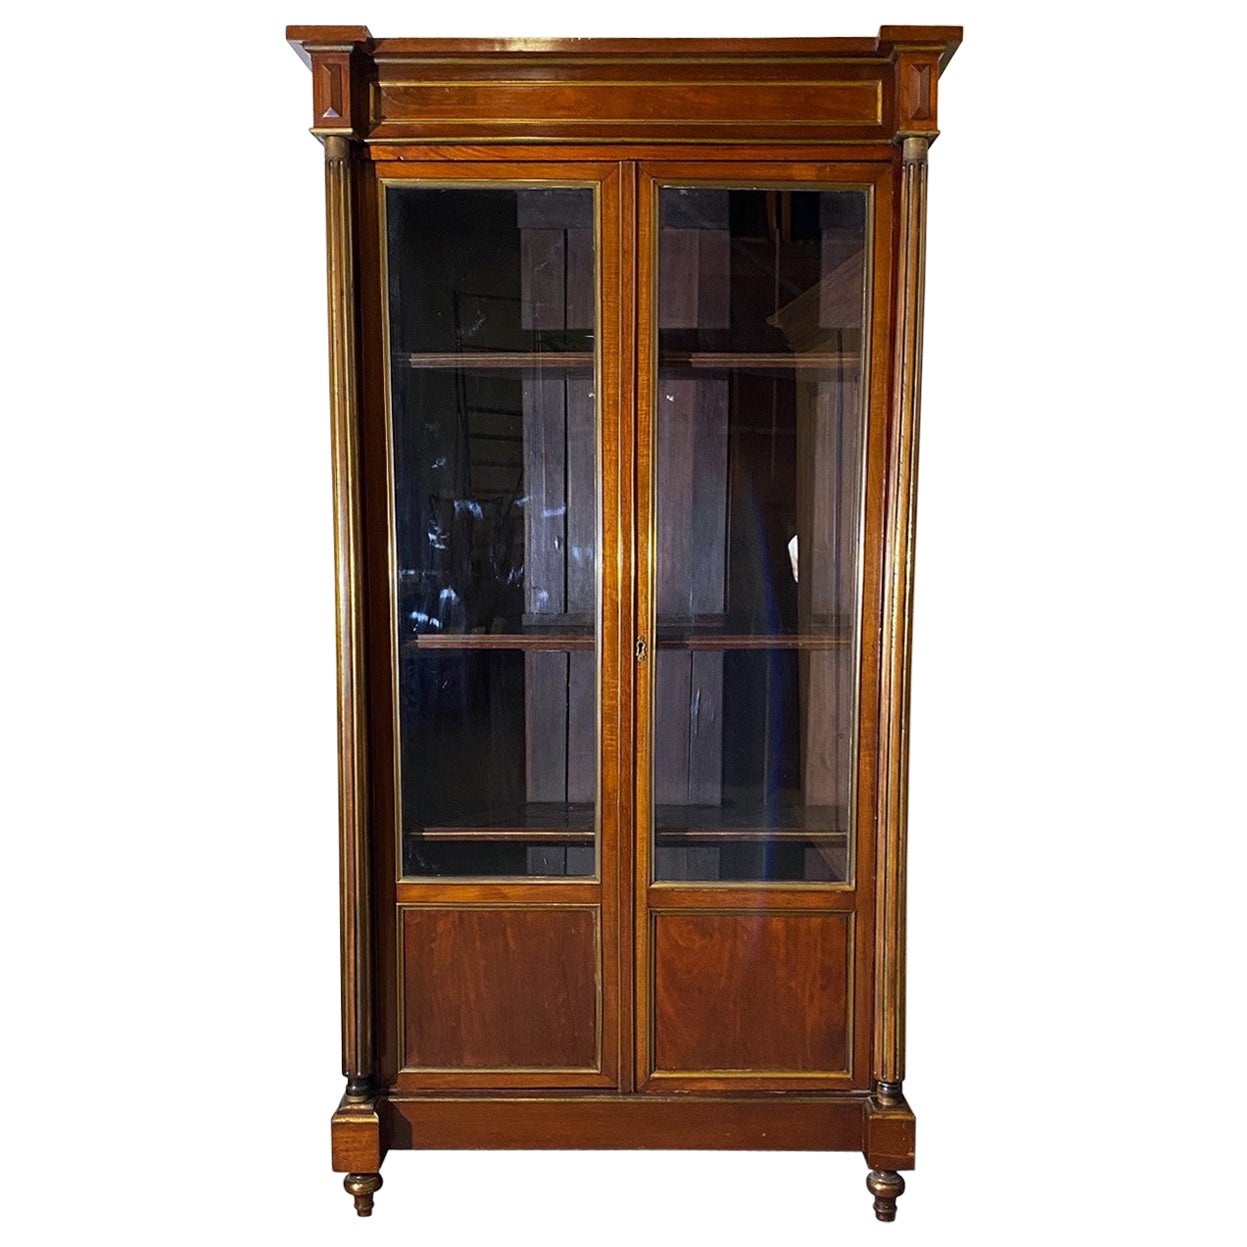 19th Century French Empire Style Cabinet/Bookcase